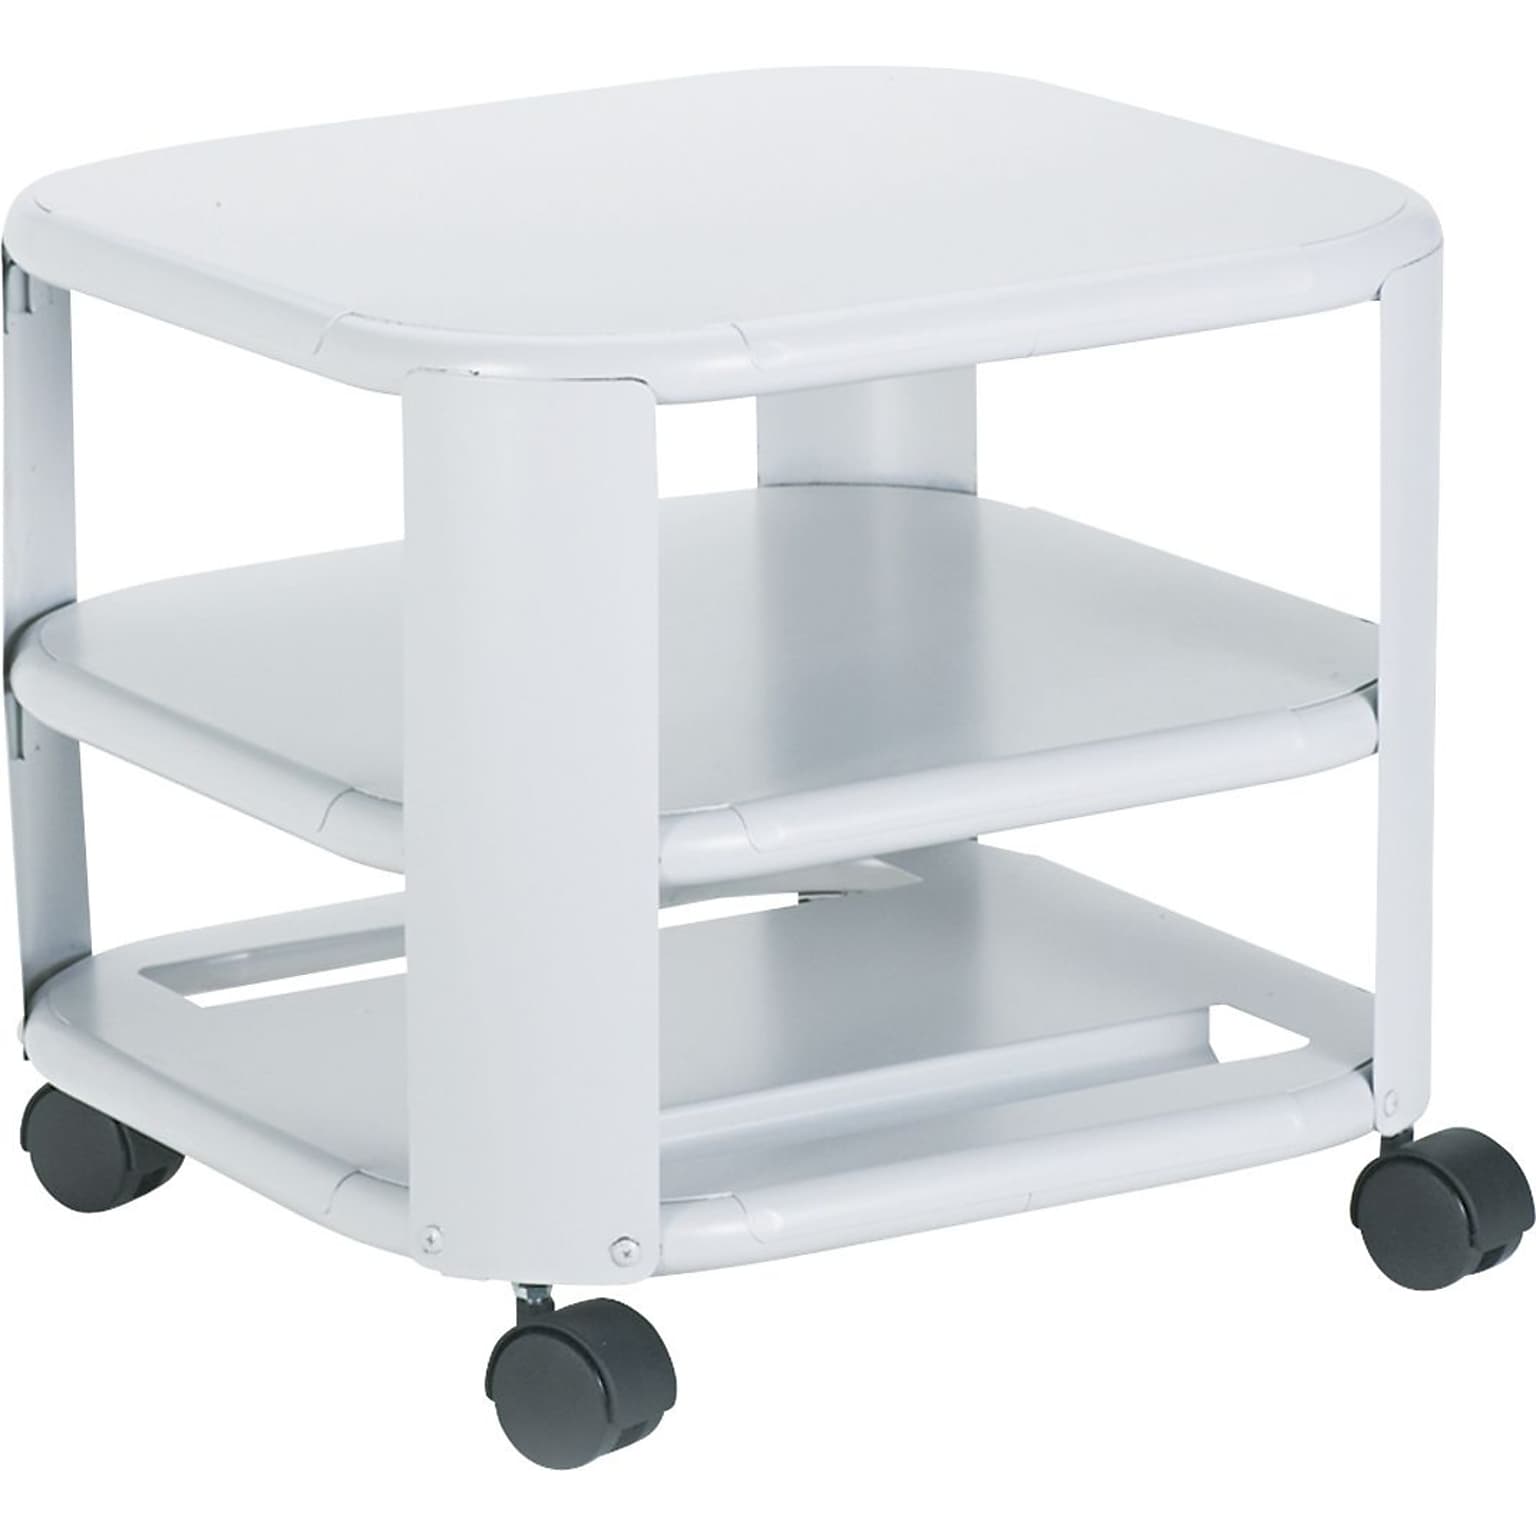 Martin Yale 3-Shelf Metal Mobile Printer Stand with Dual Wheel Hooded Casters, White (24060)